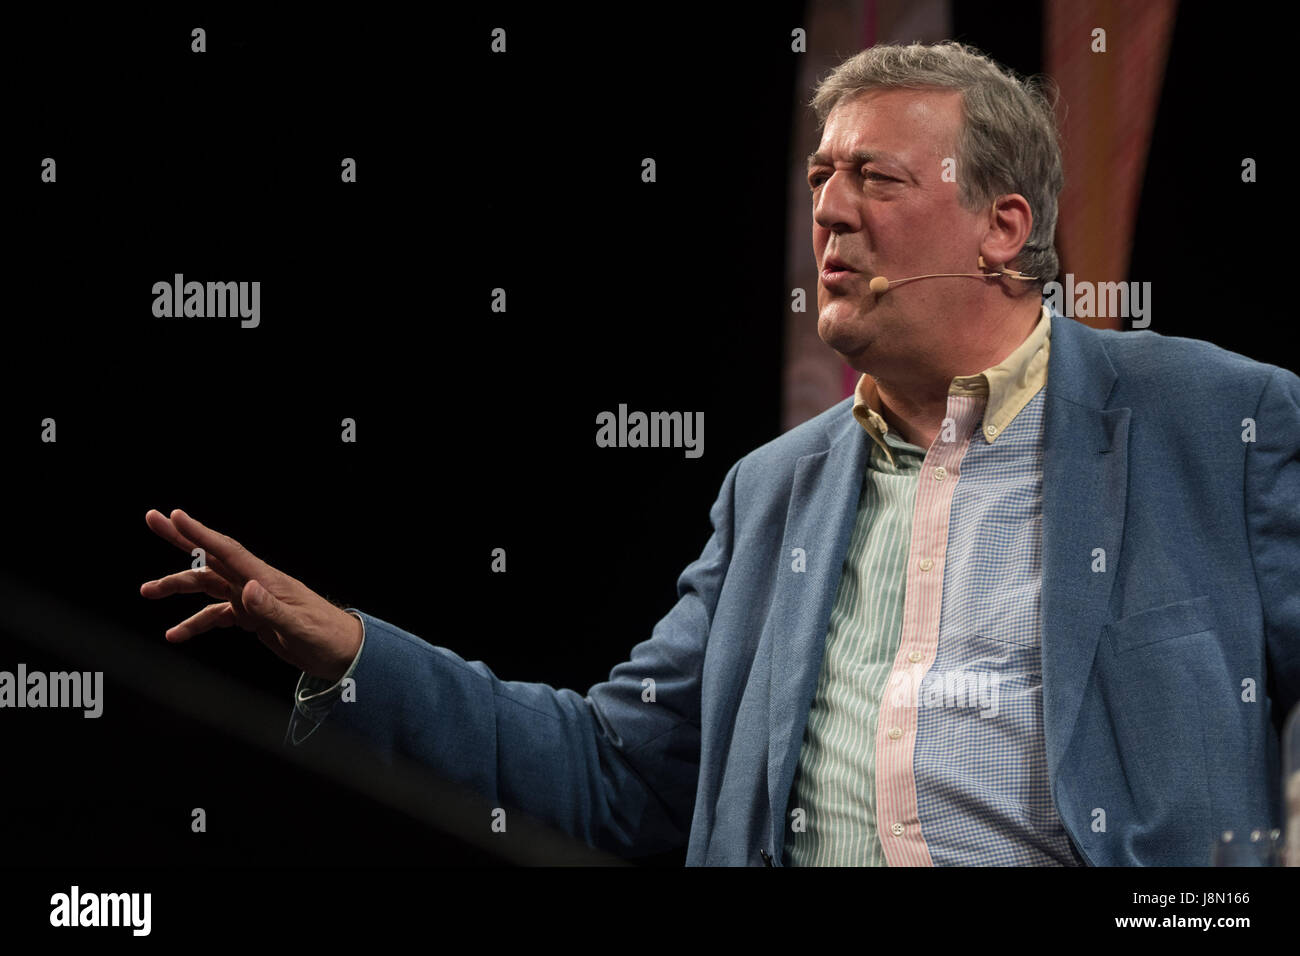 Hay Festival, Wales UK, Monday 29 May 2017 Actor, comedian and author STEPHEN FRY at the 2017 Hay Literature Festival. Now in its 30th year, the festival draws tens of thousand of visitors a day to what was described by former US president Bill Clinton as 'the woodstock of the mind' Photo credit Credit: keith morris/Alamy Live News Stock Photo